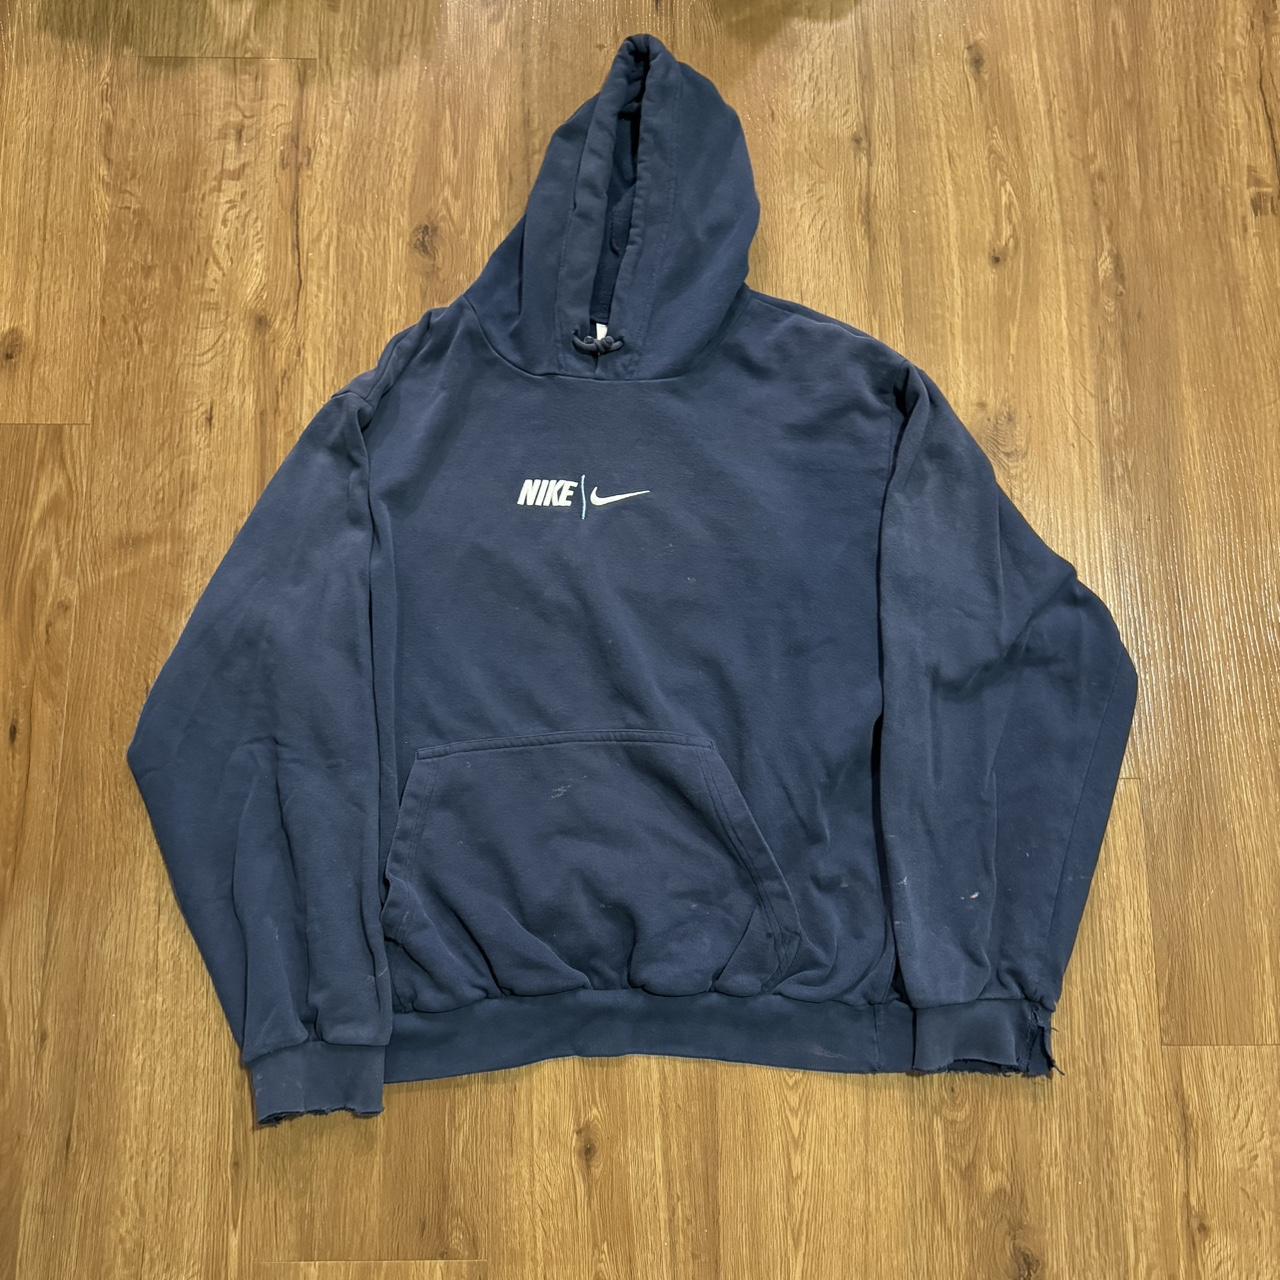 item listed by thriftys_